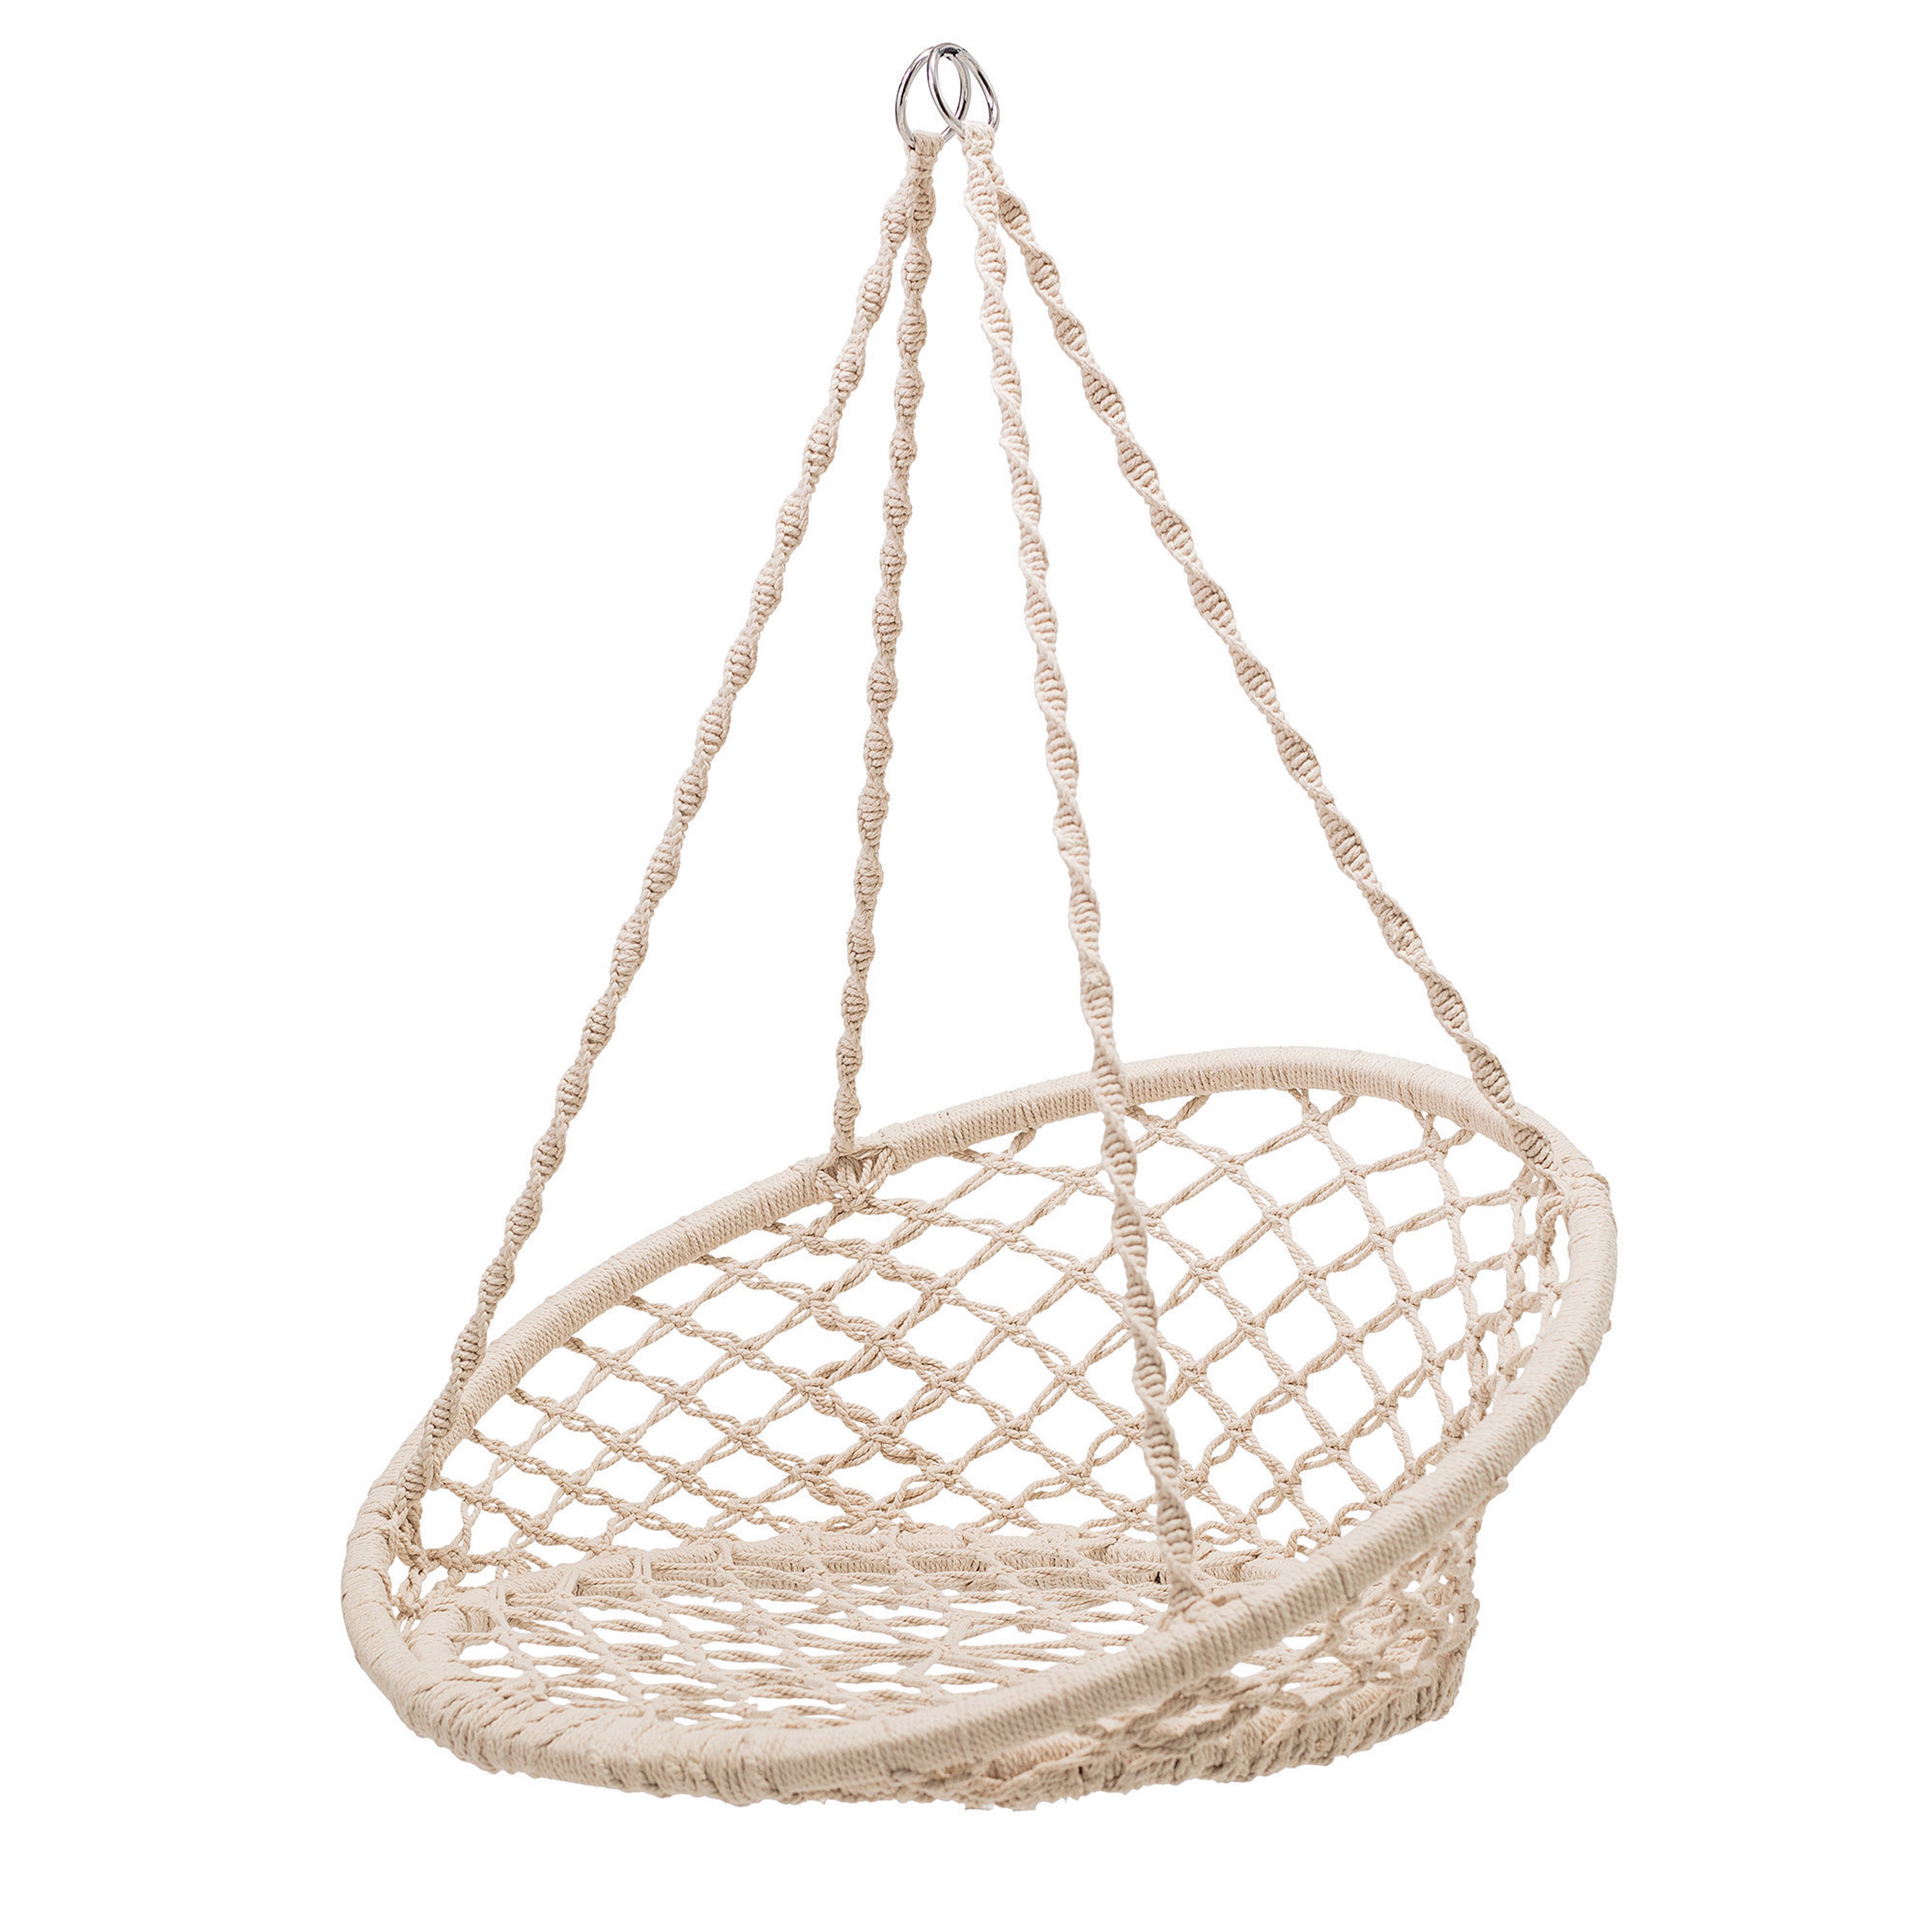 Hanging Handwoven Cotton Macramé Chair with Metal Frame - Image 0